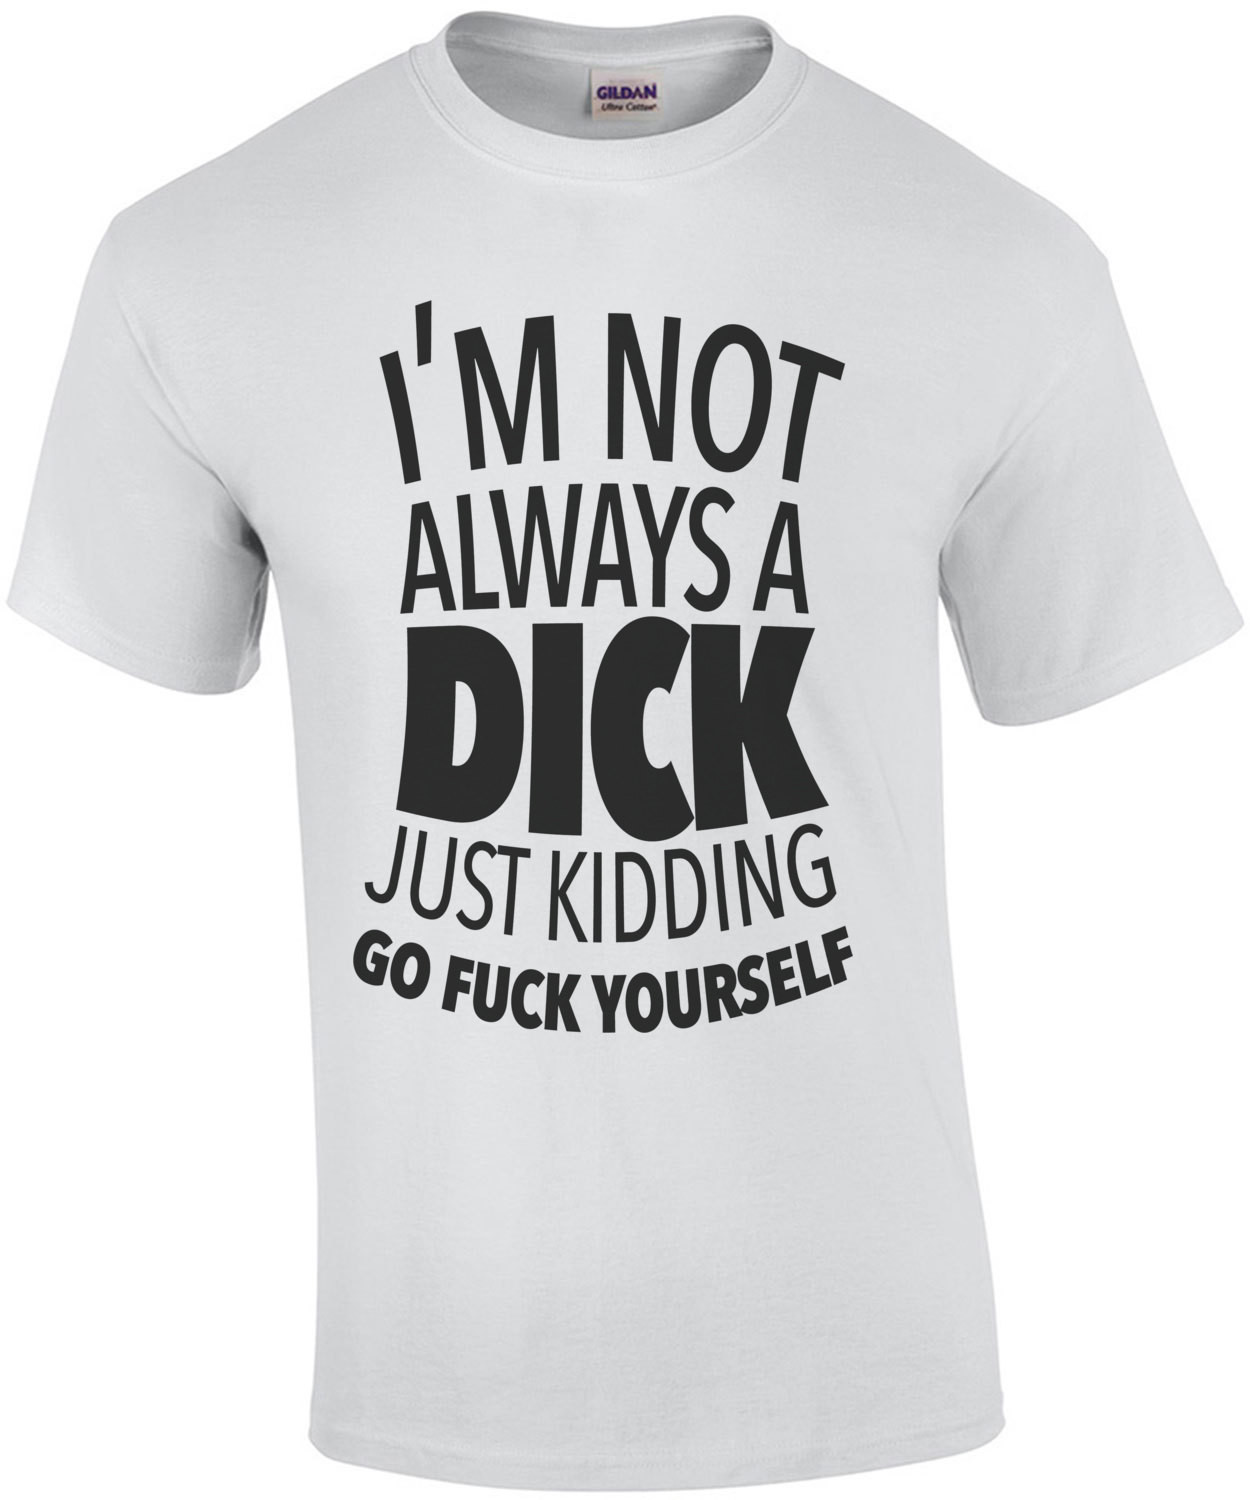 I'm not always a dick just kidding go fuck yourself - insult t-shirt